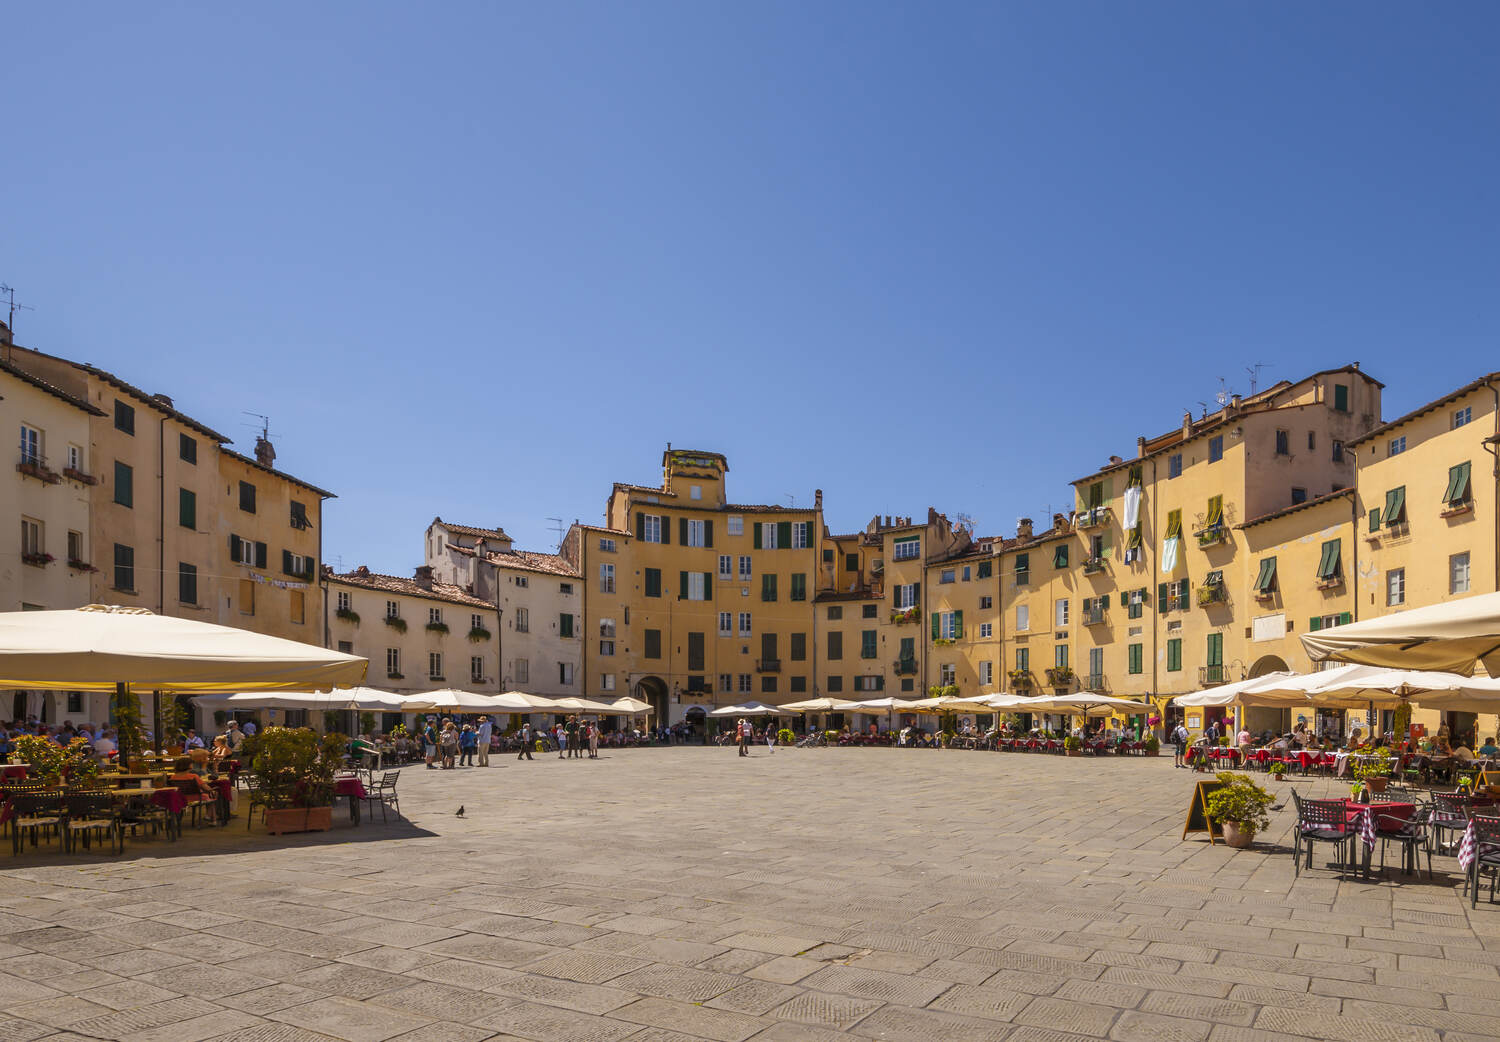 Piazza dell'anfiteatro in Lucca - what to do in Lucca in one day